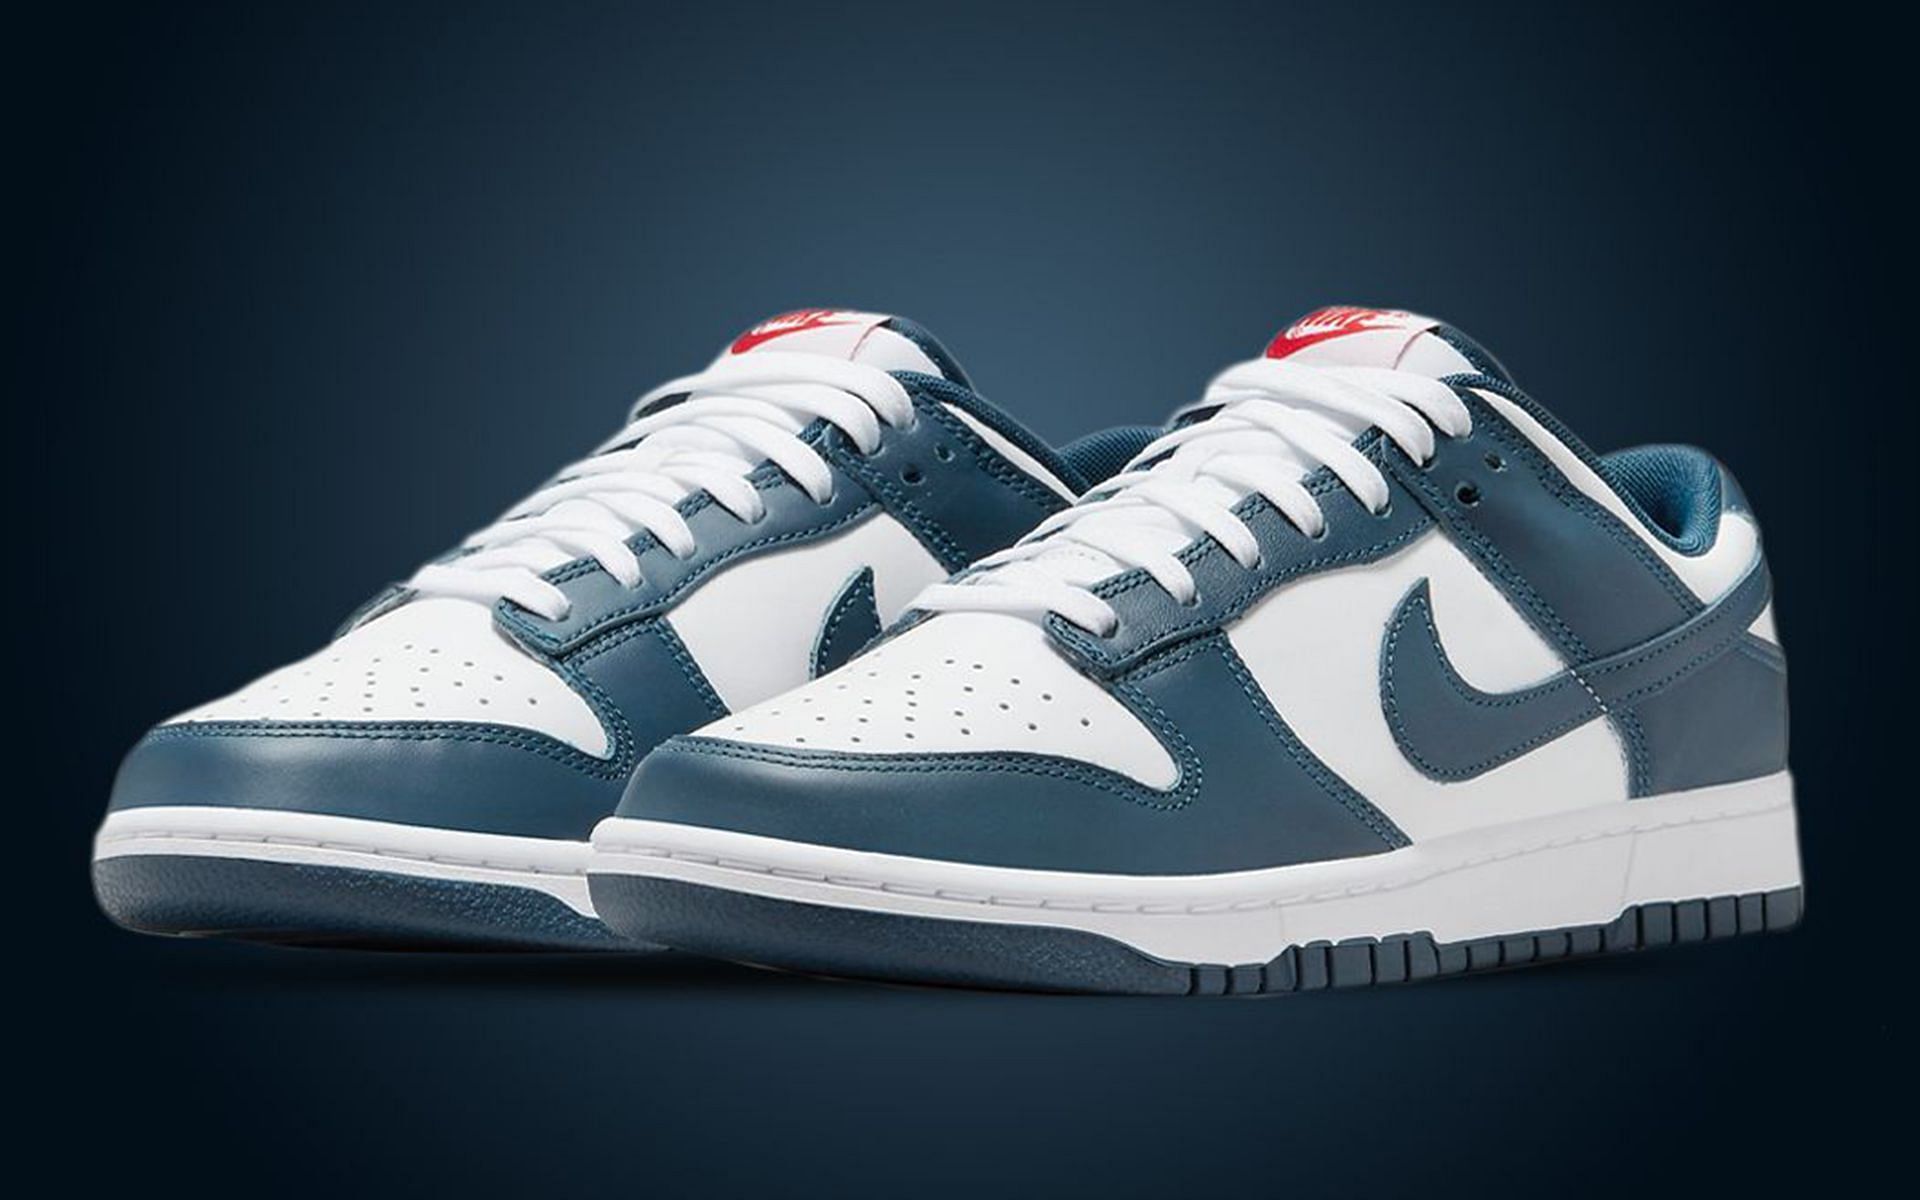 Where to buy Nike Dunk Low Valerian Blue shoes? Price, release date and more details explored